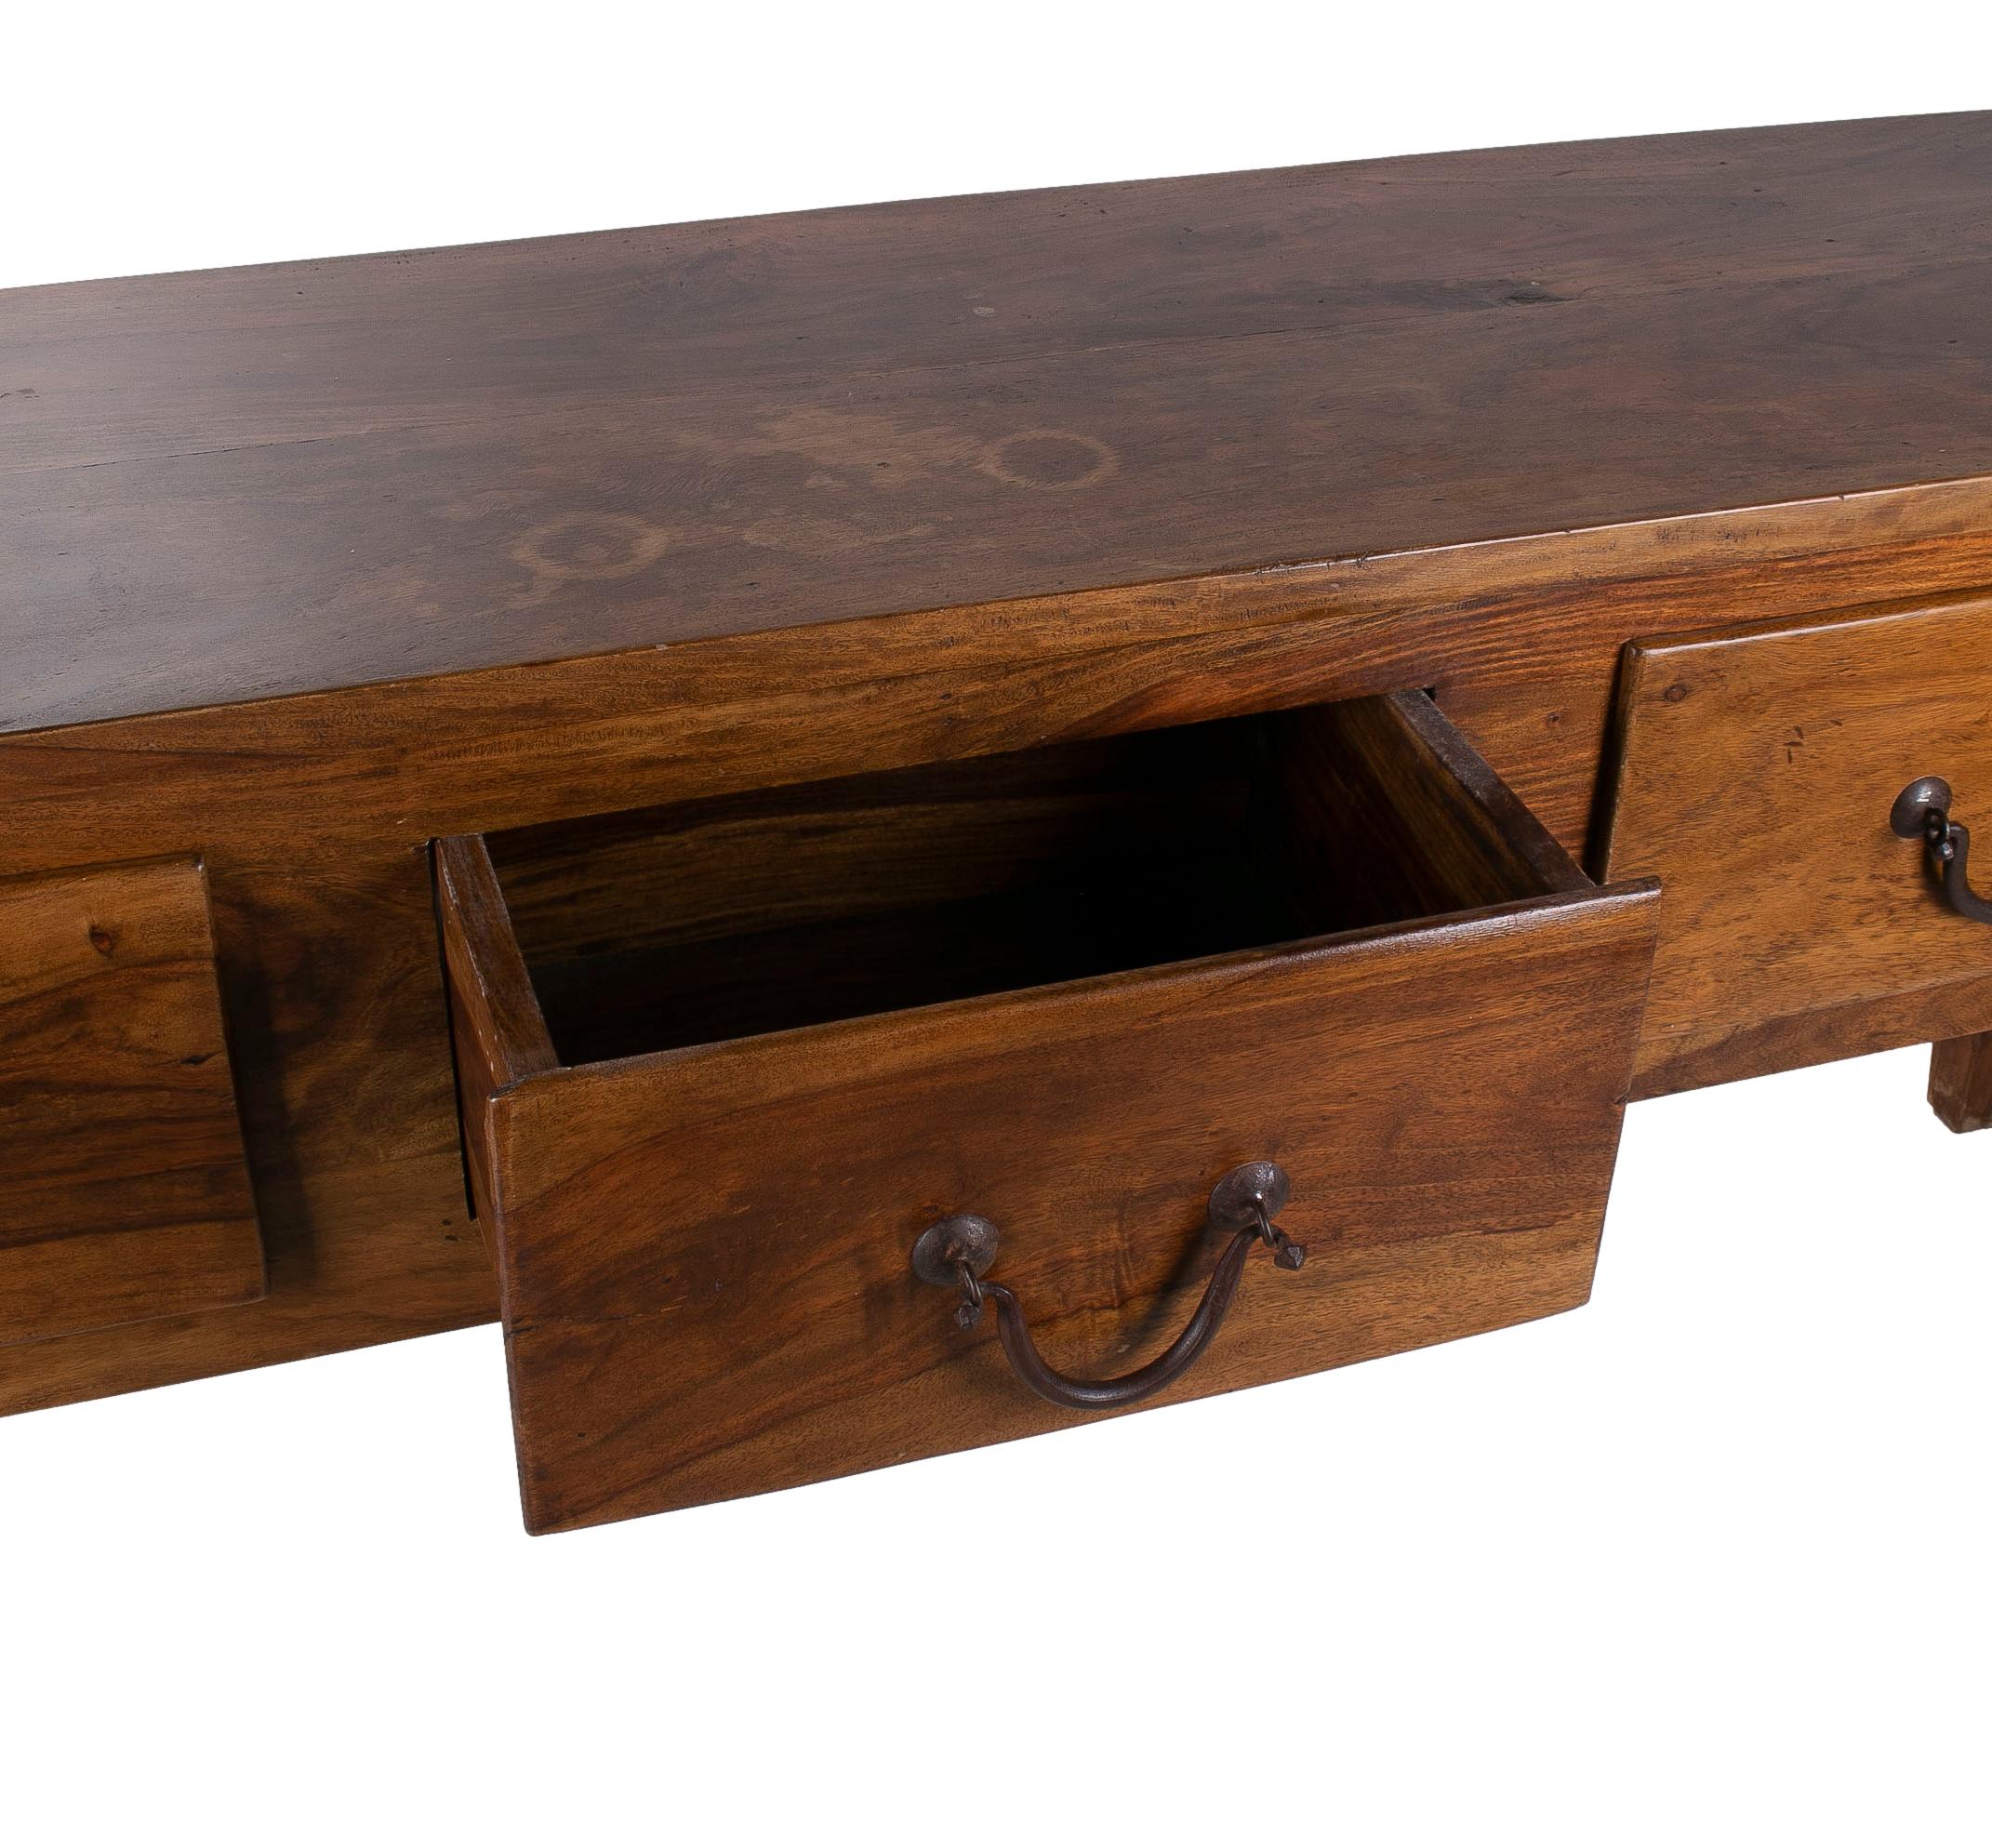 20th Century Spanish Rustic 3-Drawer Wooden Console Table